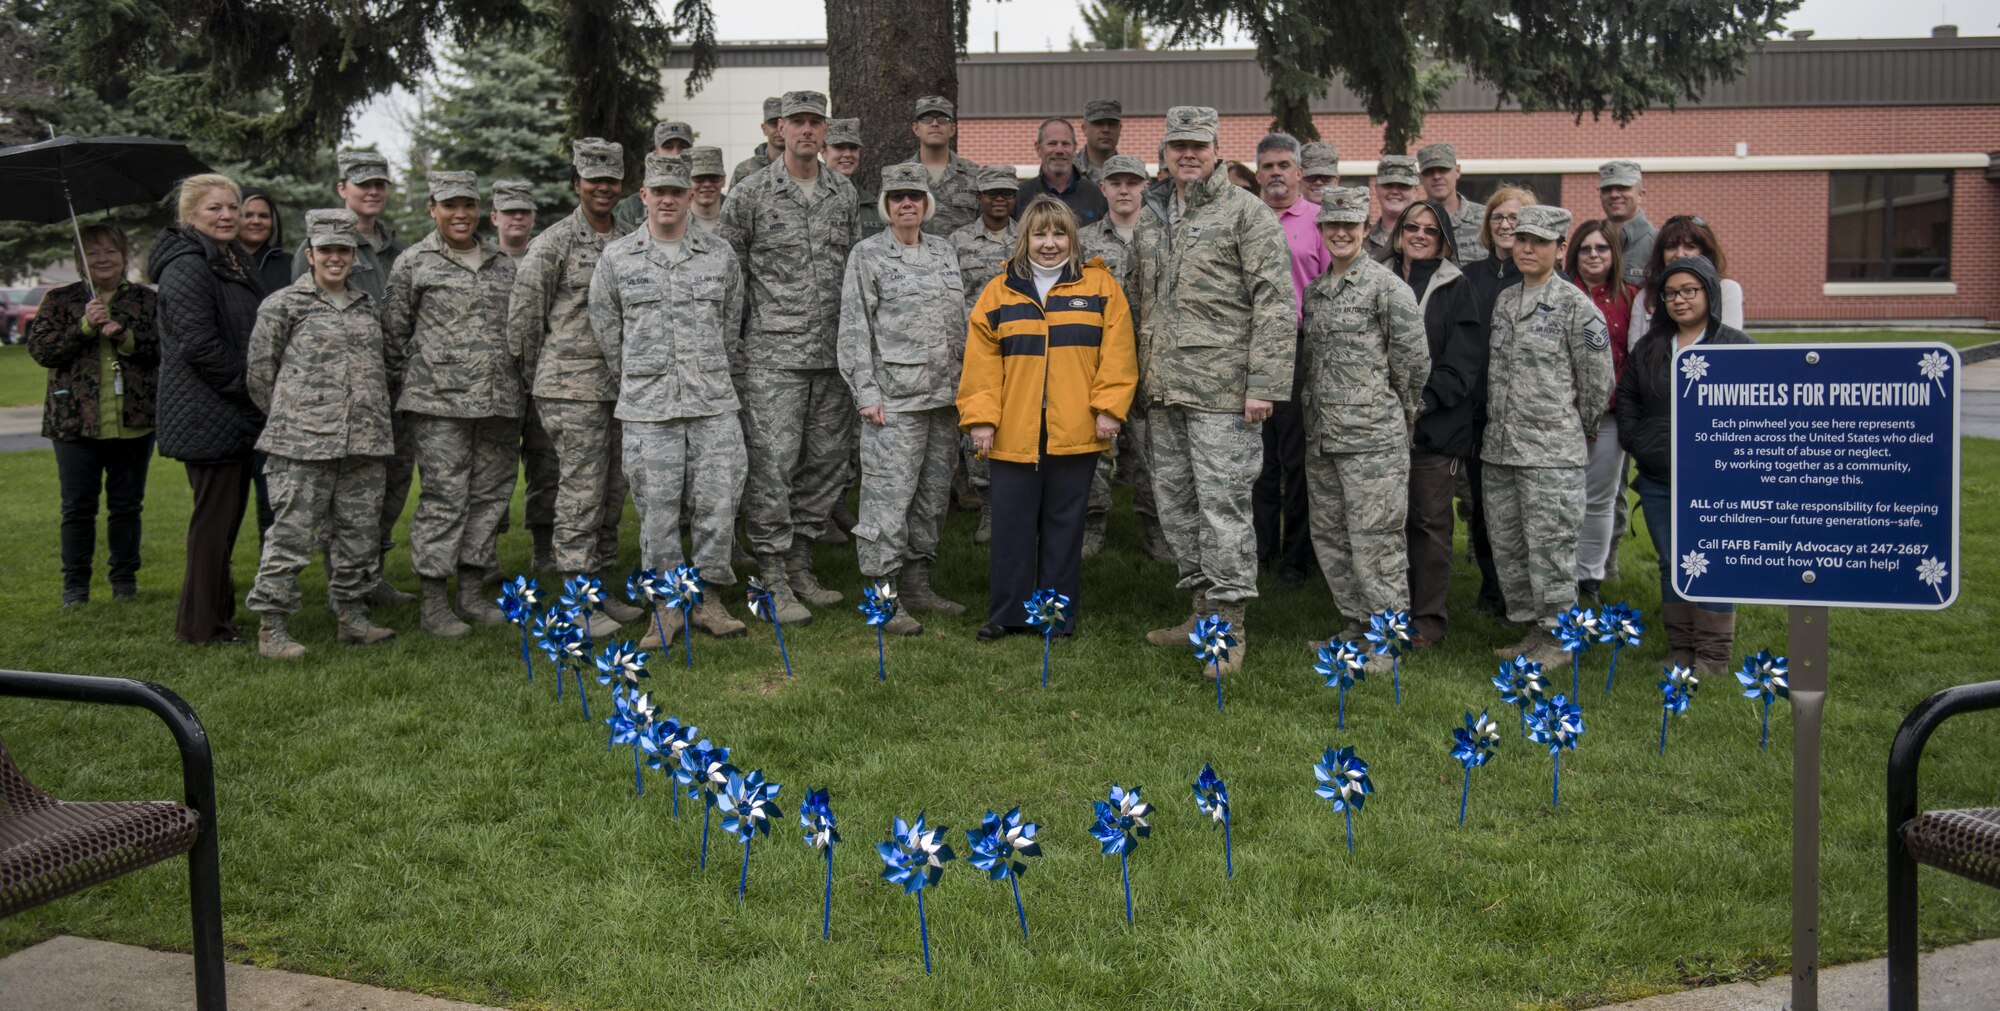 Members of Team Fairchild gathered during the Pinwheels for Prevention event to raise awareness for Child Abuse Awareness Month Apr. 12, 2017, at Fairchild Air Force Base, Washington. For more than 30 years, America has acknowledged April as Child Abuse Awareness Month. Sweeping legislation throughout the 70s and 80s gave rise to the needed public awareness campaign. Despite these efforts, in 2014, the Center for Disease Control estimated over 1,500 children died from abuse and neglect in the United States. (U.S. Air Force photo/Airman 1st Class Sean Campbell) 